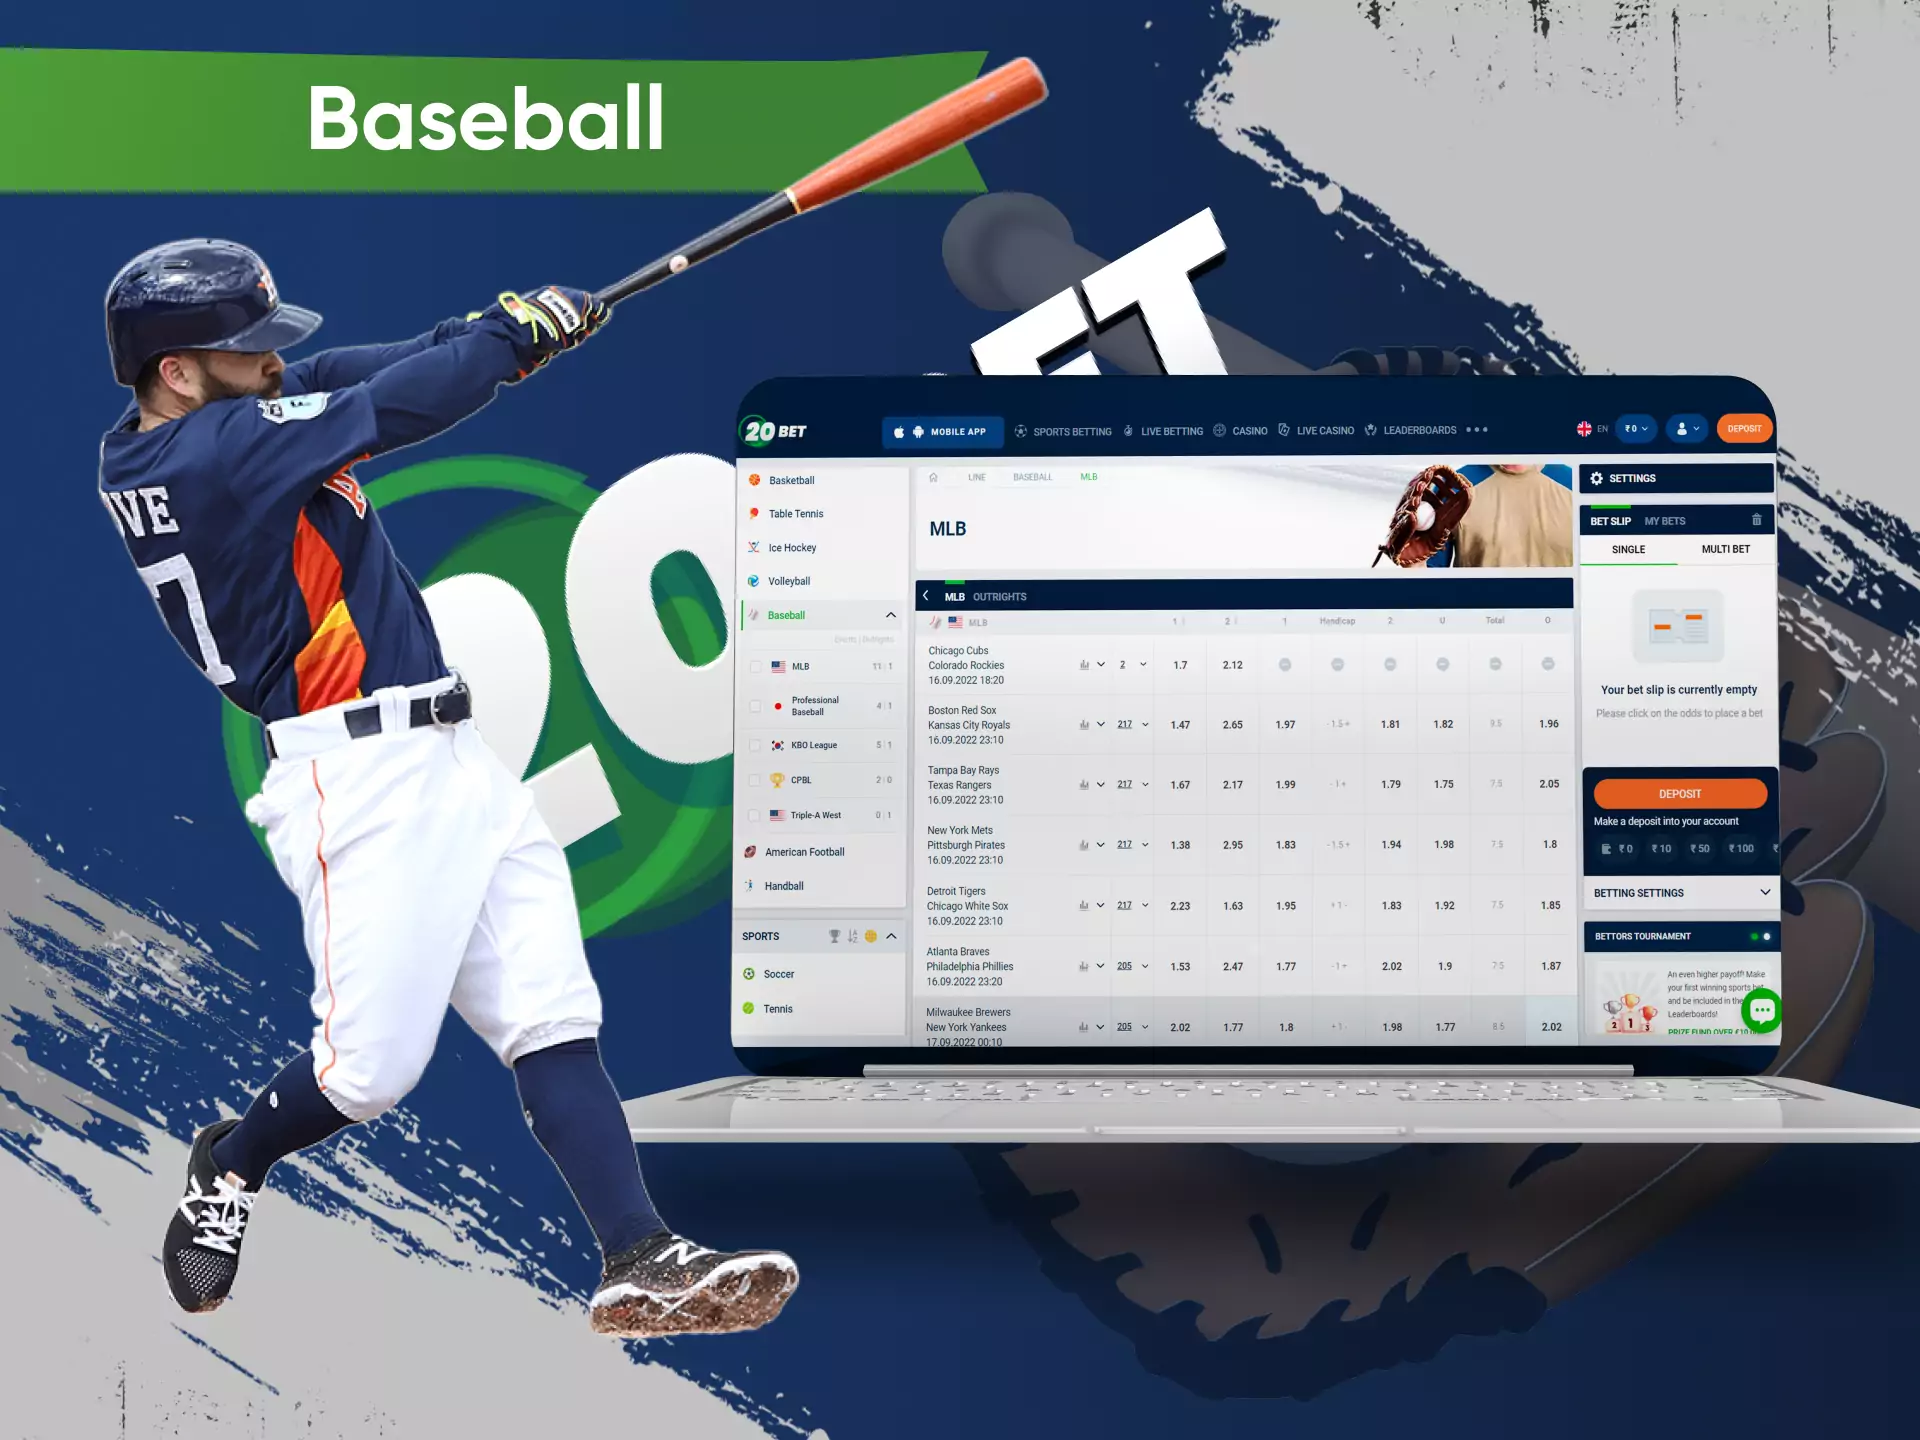 On 20bet, you can place bets on baseball events online.